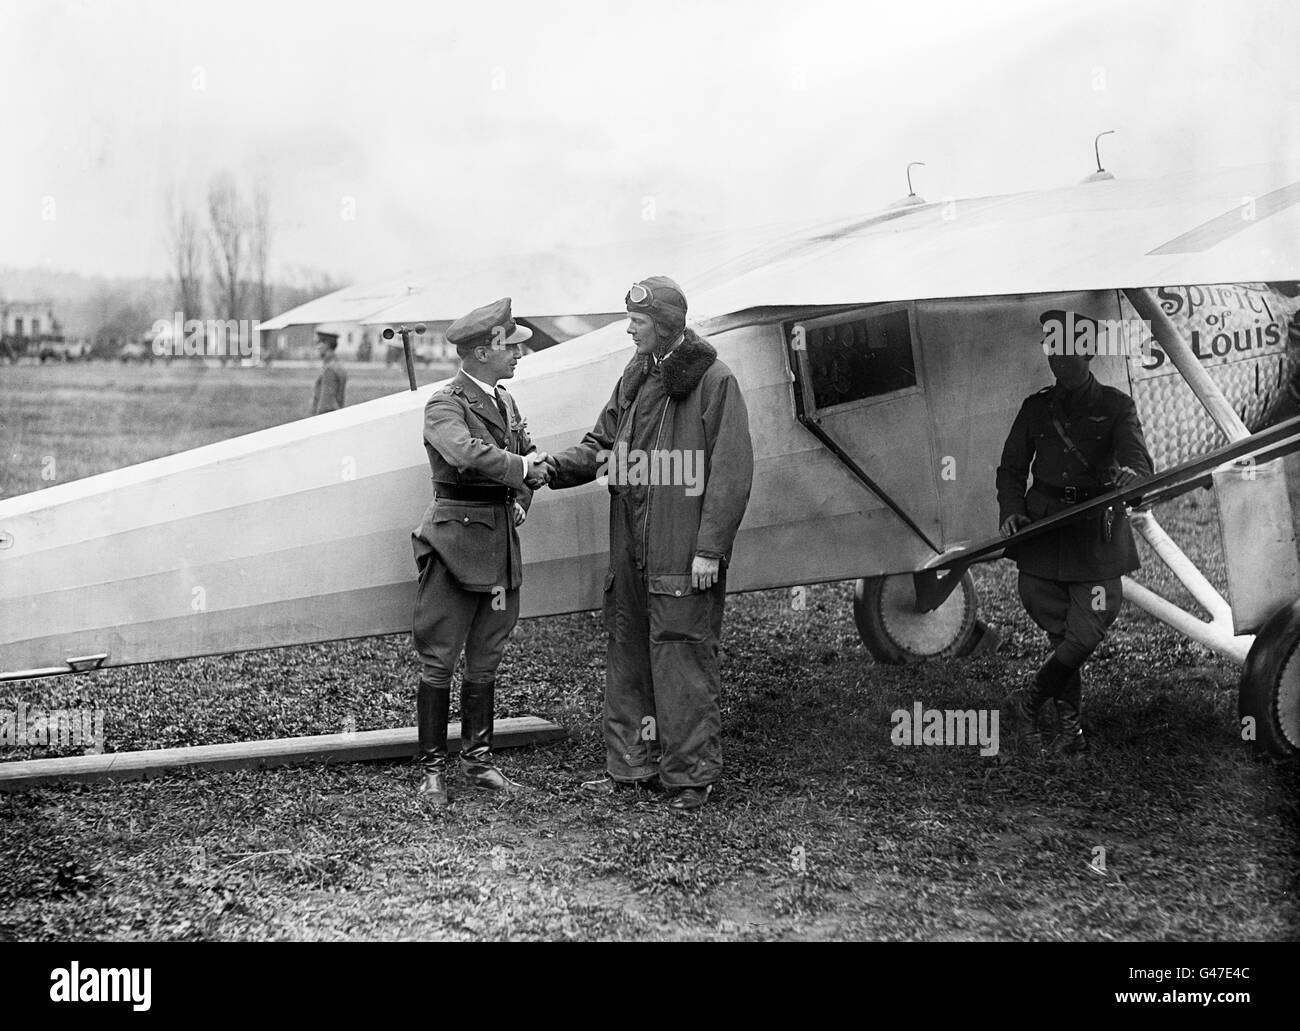 Charles Lindbergh (1902-1974) with his airplane 'Spirit of St. Louis'. Photo from Harris and Ewing, 1927 or 1928. Stock Photo